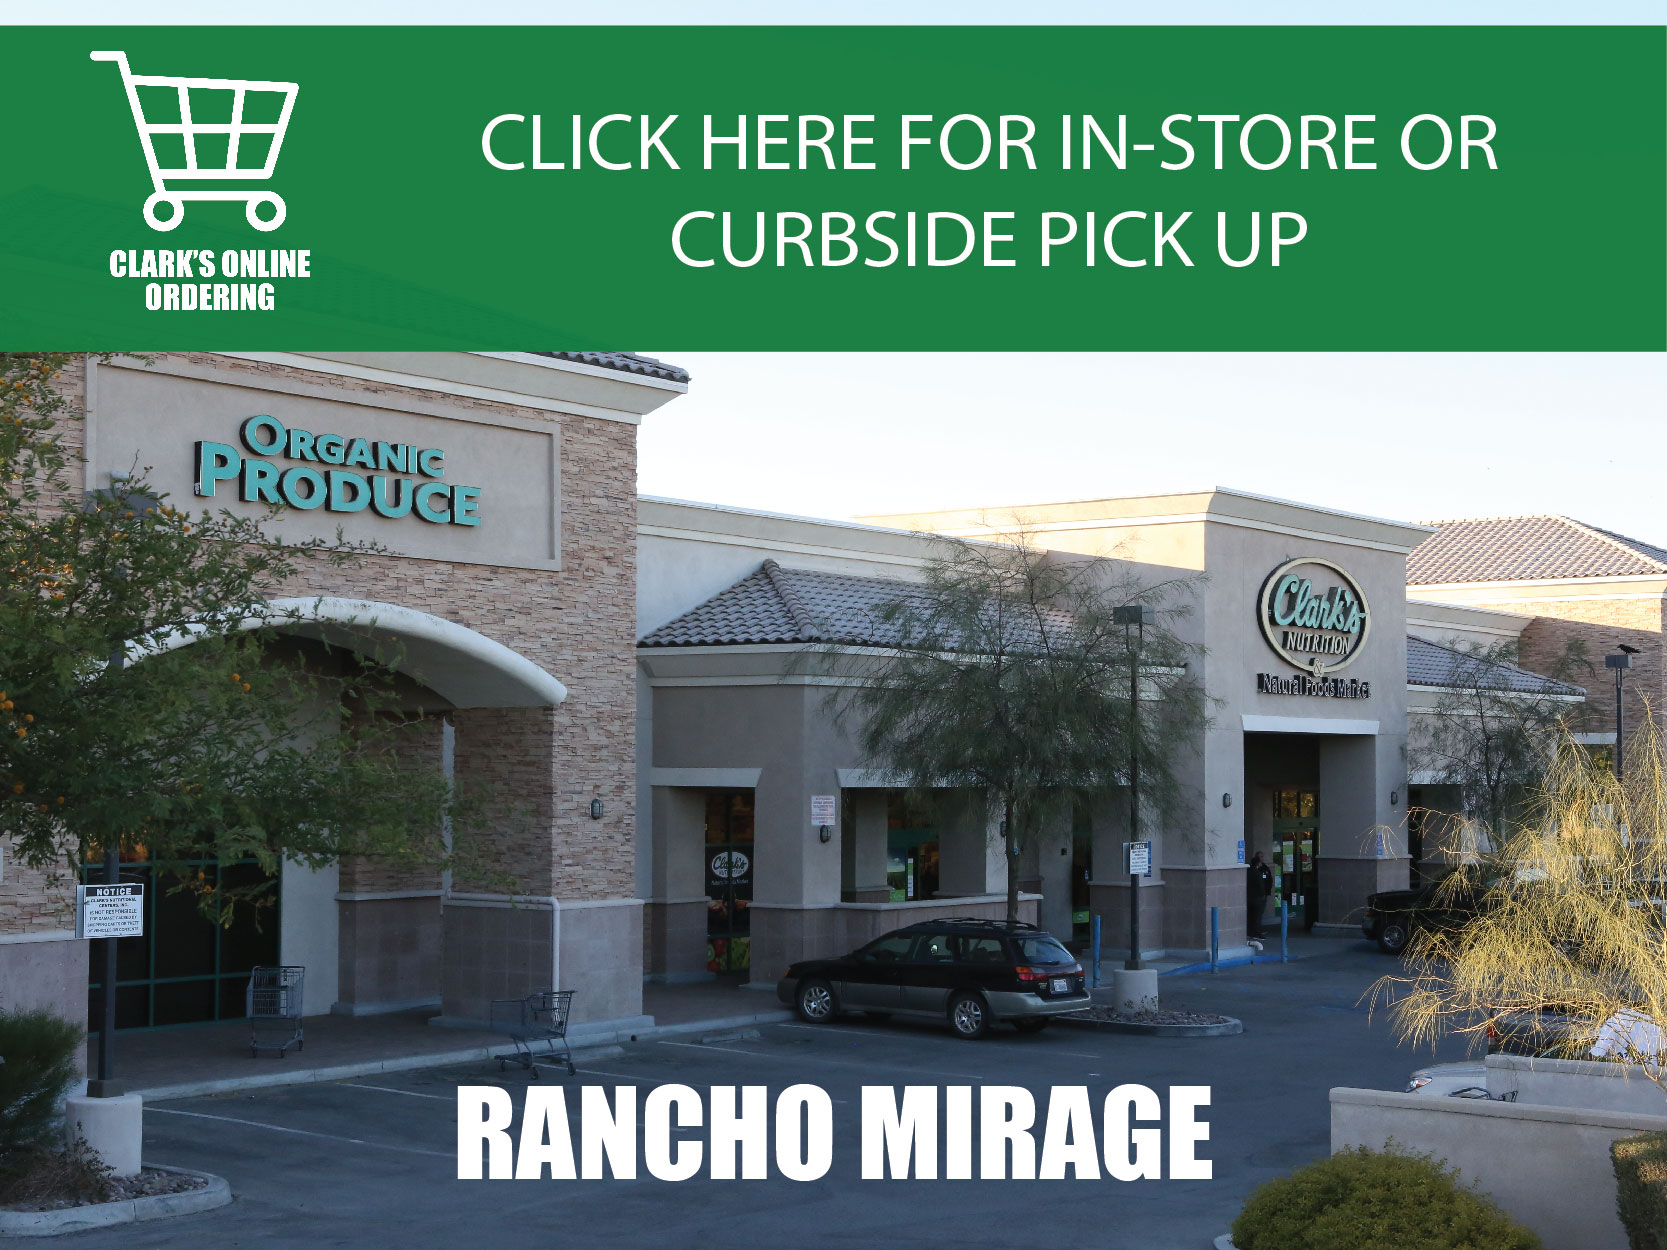 Shop our Rancho Mirage Store